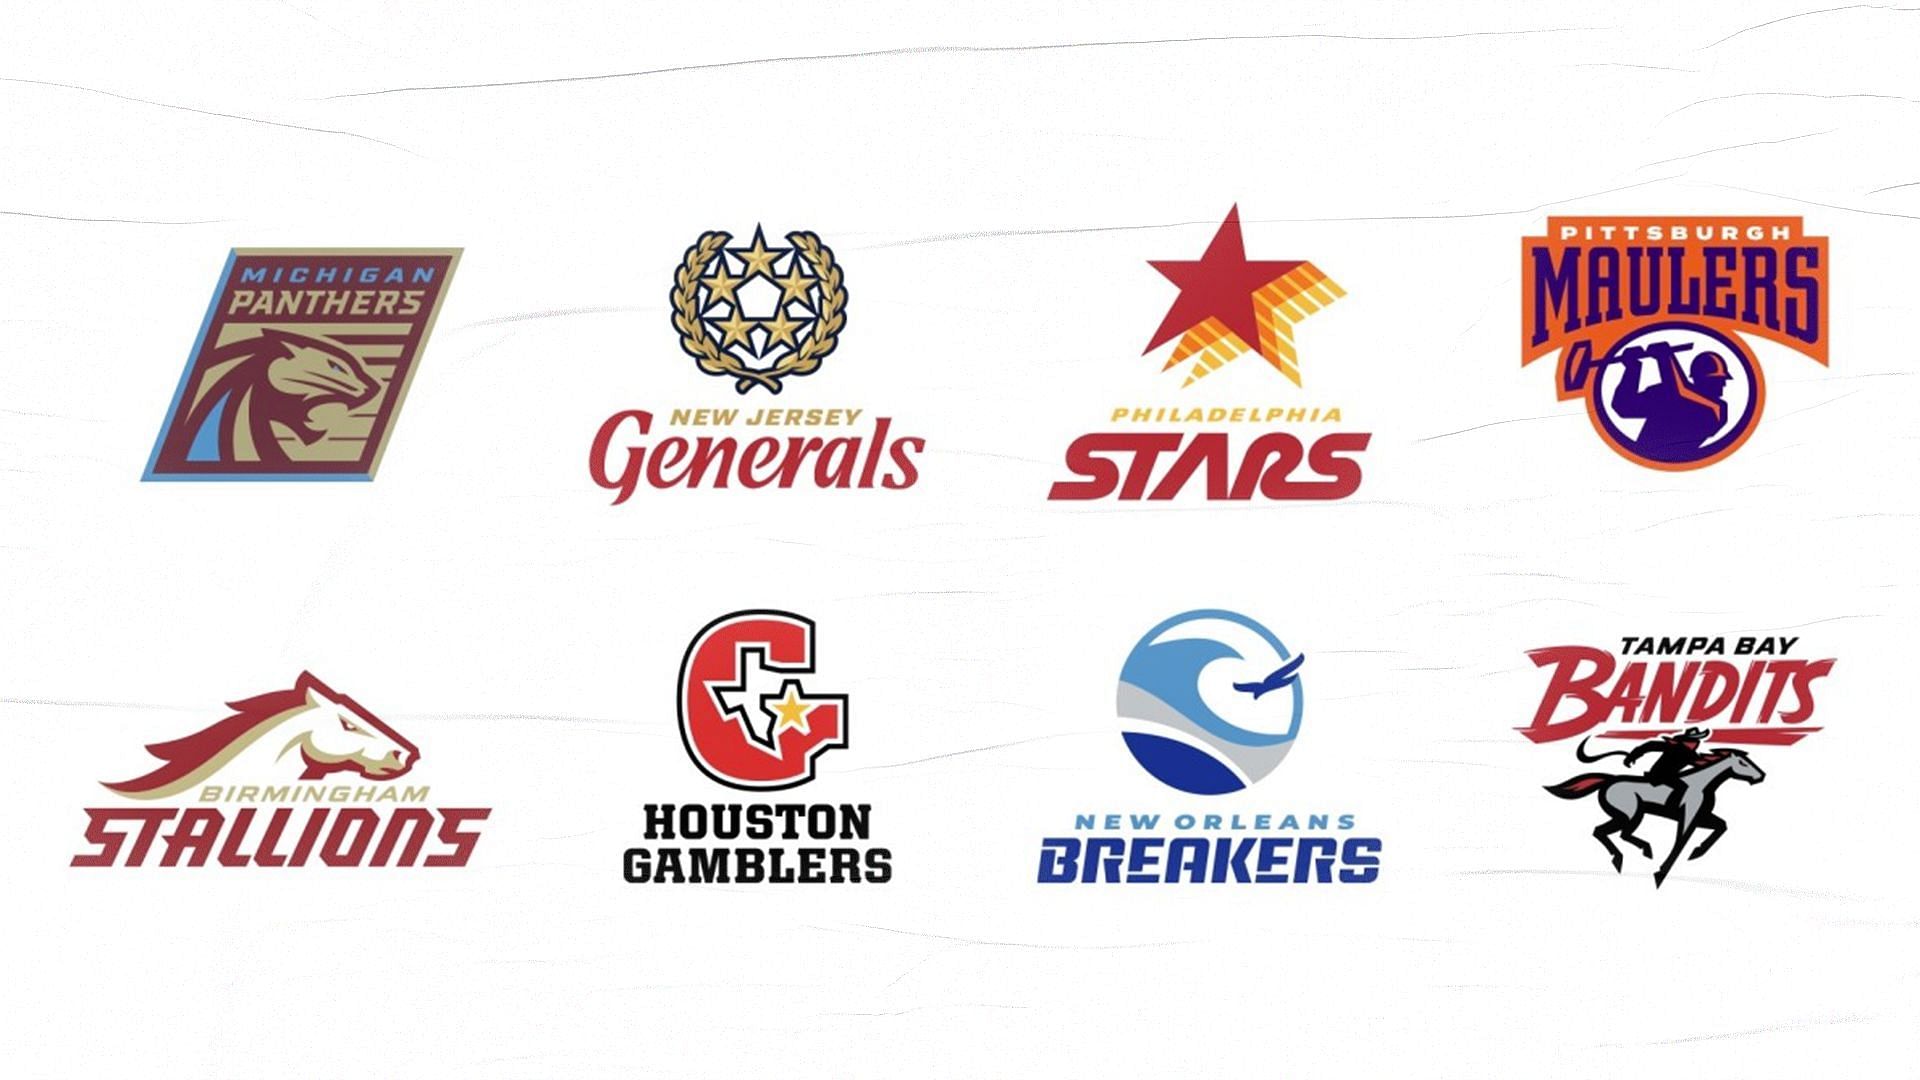 The eight teams in the USFL (Courtesy of Sportingnews.com)